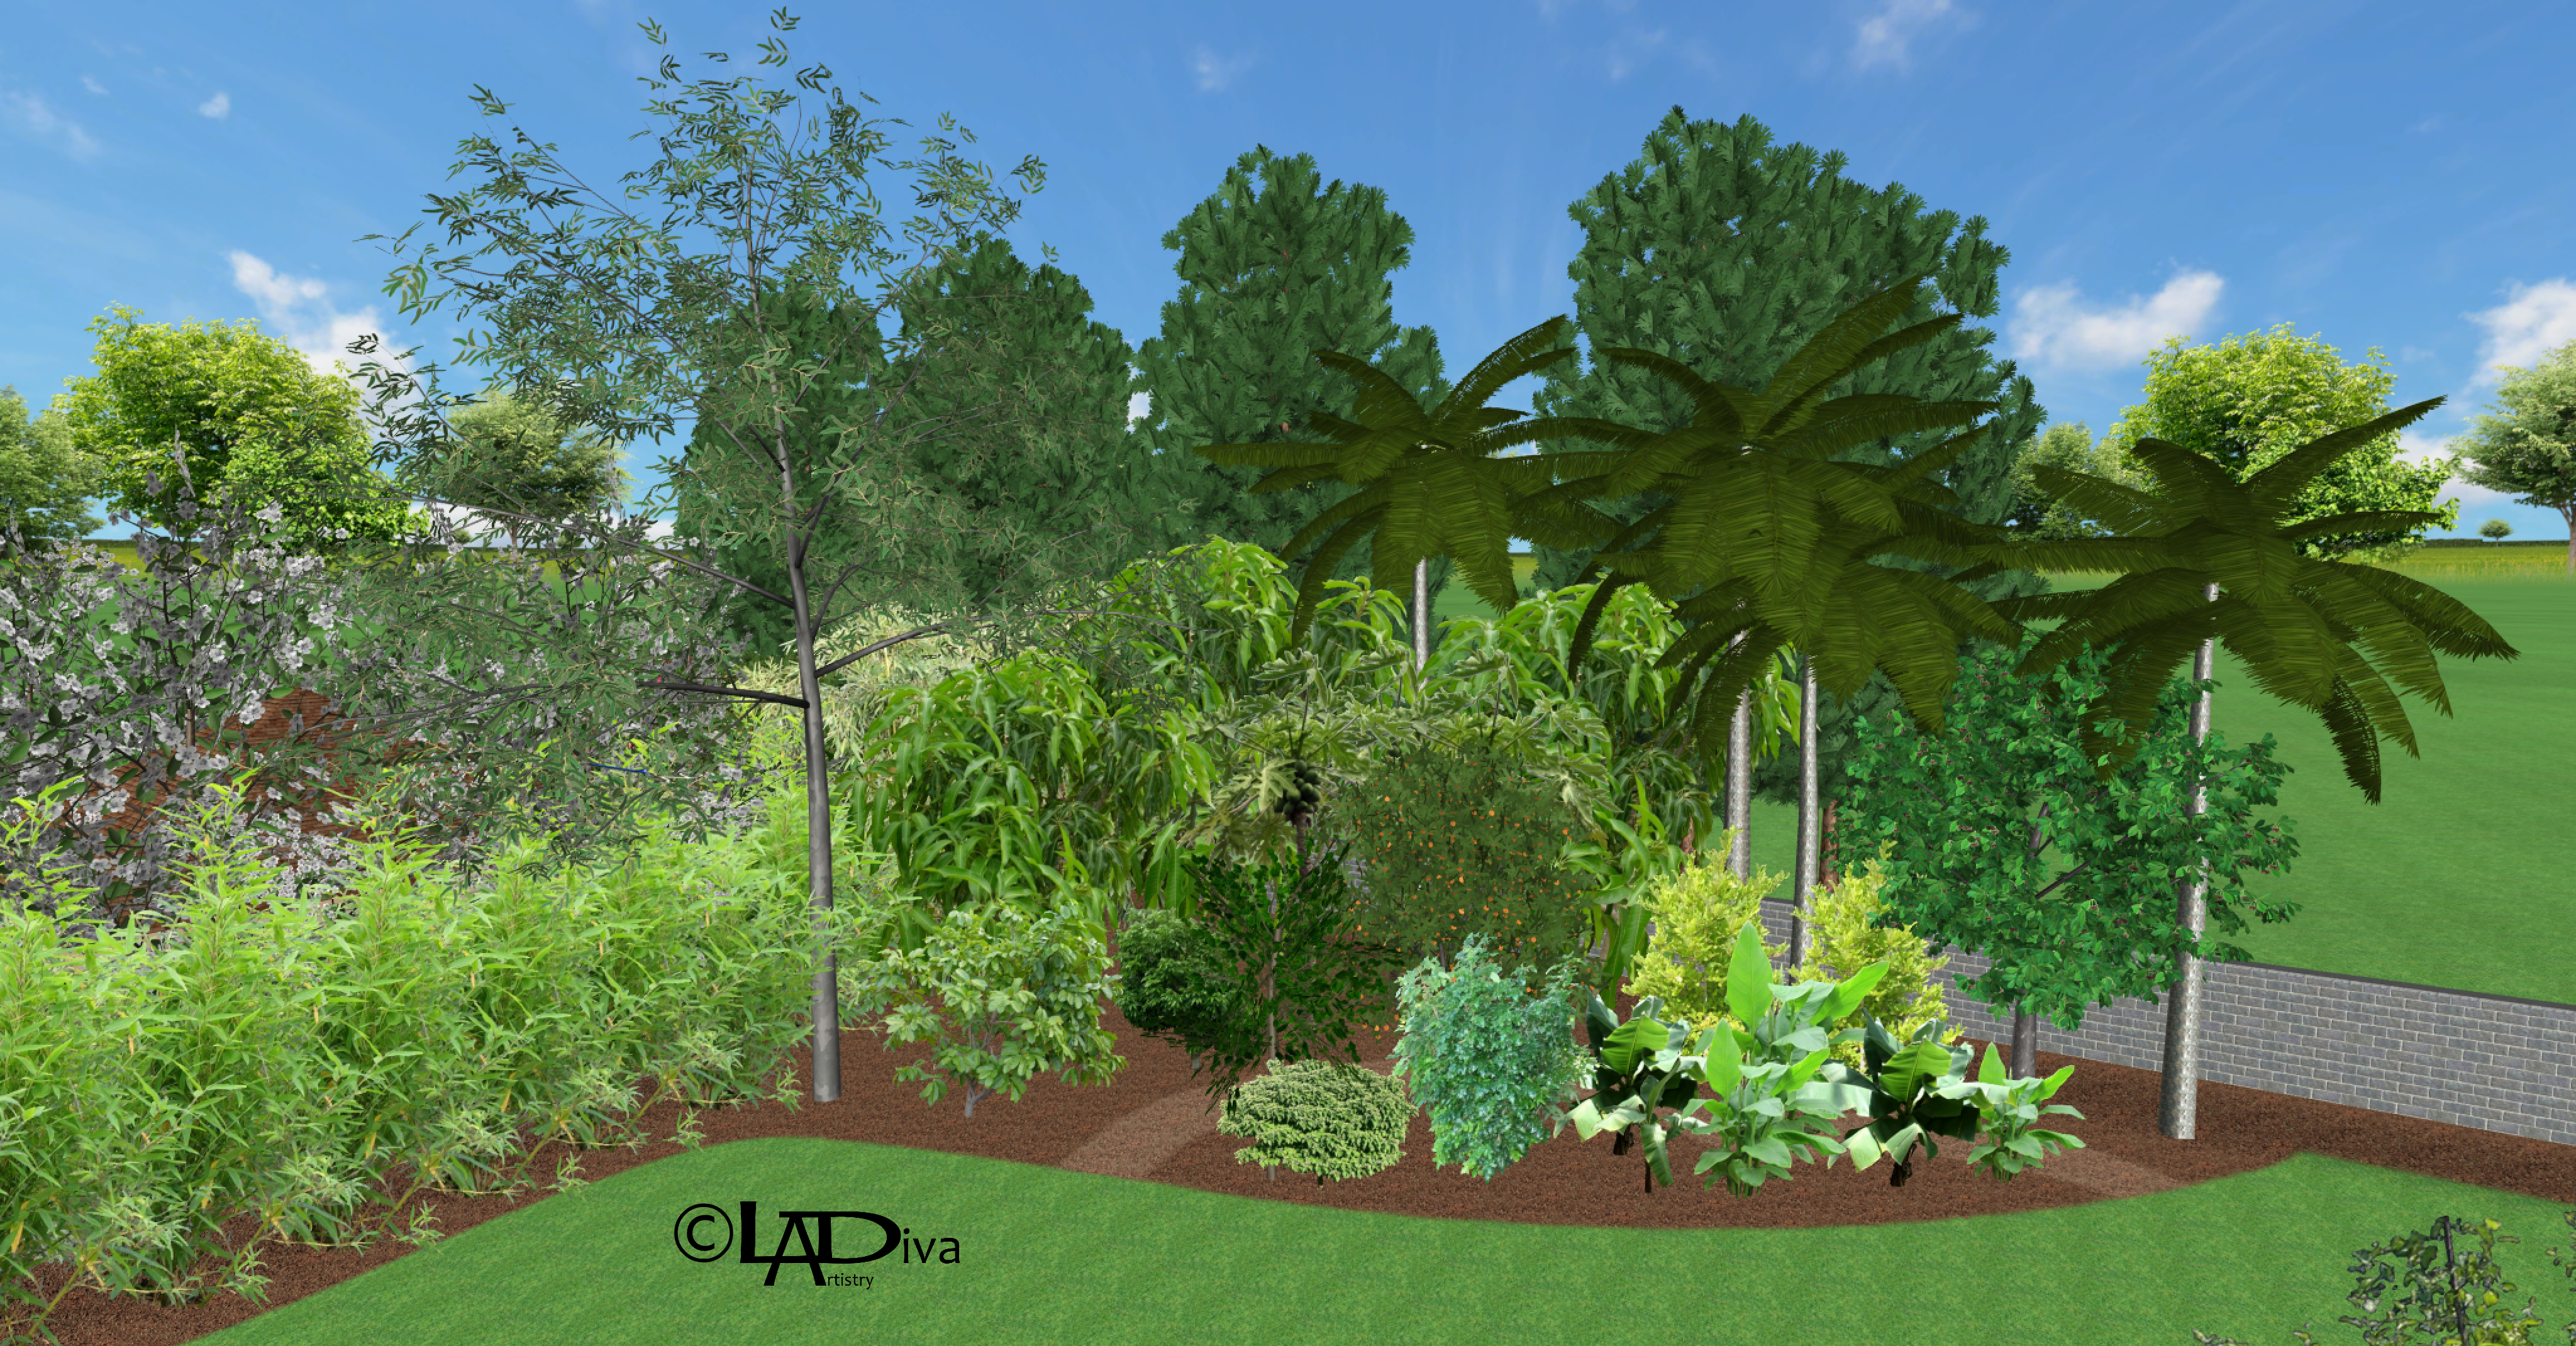 Edible Demonstration Garden Featuring Tropical Fruit Trees, Flood Irrigation Planning - Laveen, AZ ©LADiva Artistry Landscape Design Solutions, specializing in edible & tropical garden design in Gilbert, AZ. Featuring Custom 2D Color Master Landscape Design Plans and 3D Virtual Walkthrough Tours. Cultivating beautiful, productive oases in the greater Phoenix, Arizona area showcasing tropical trees, fruit trees, edible plants & herbs in low maintenance, stunning gardens.